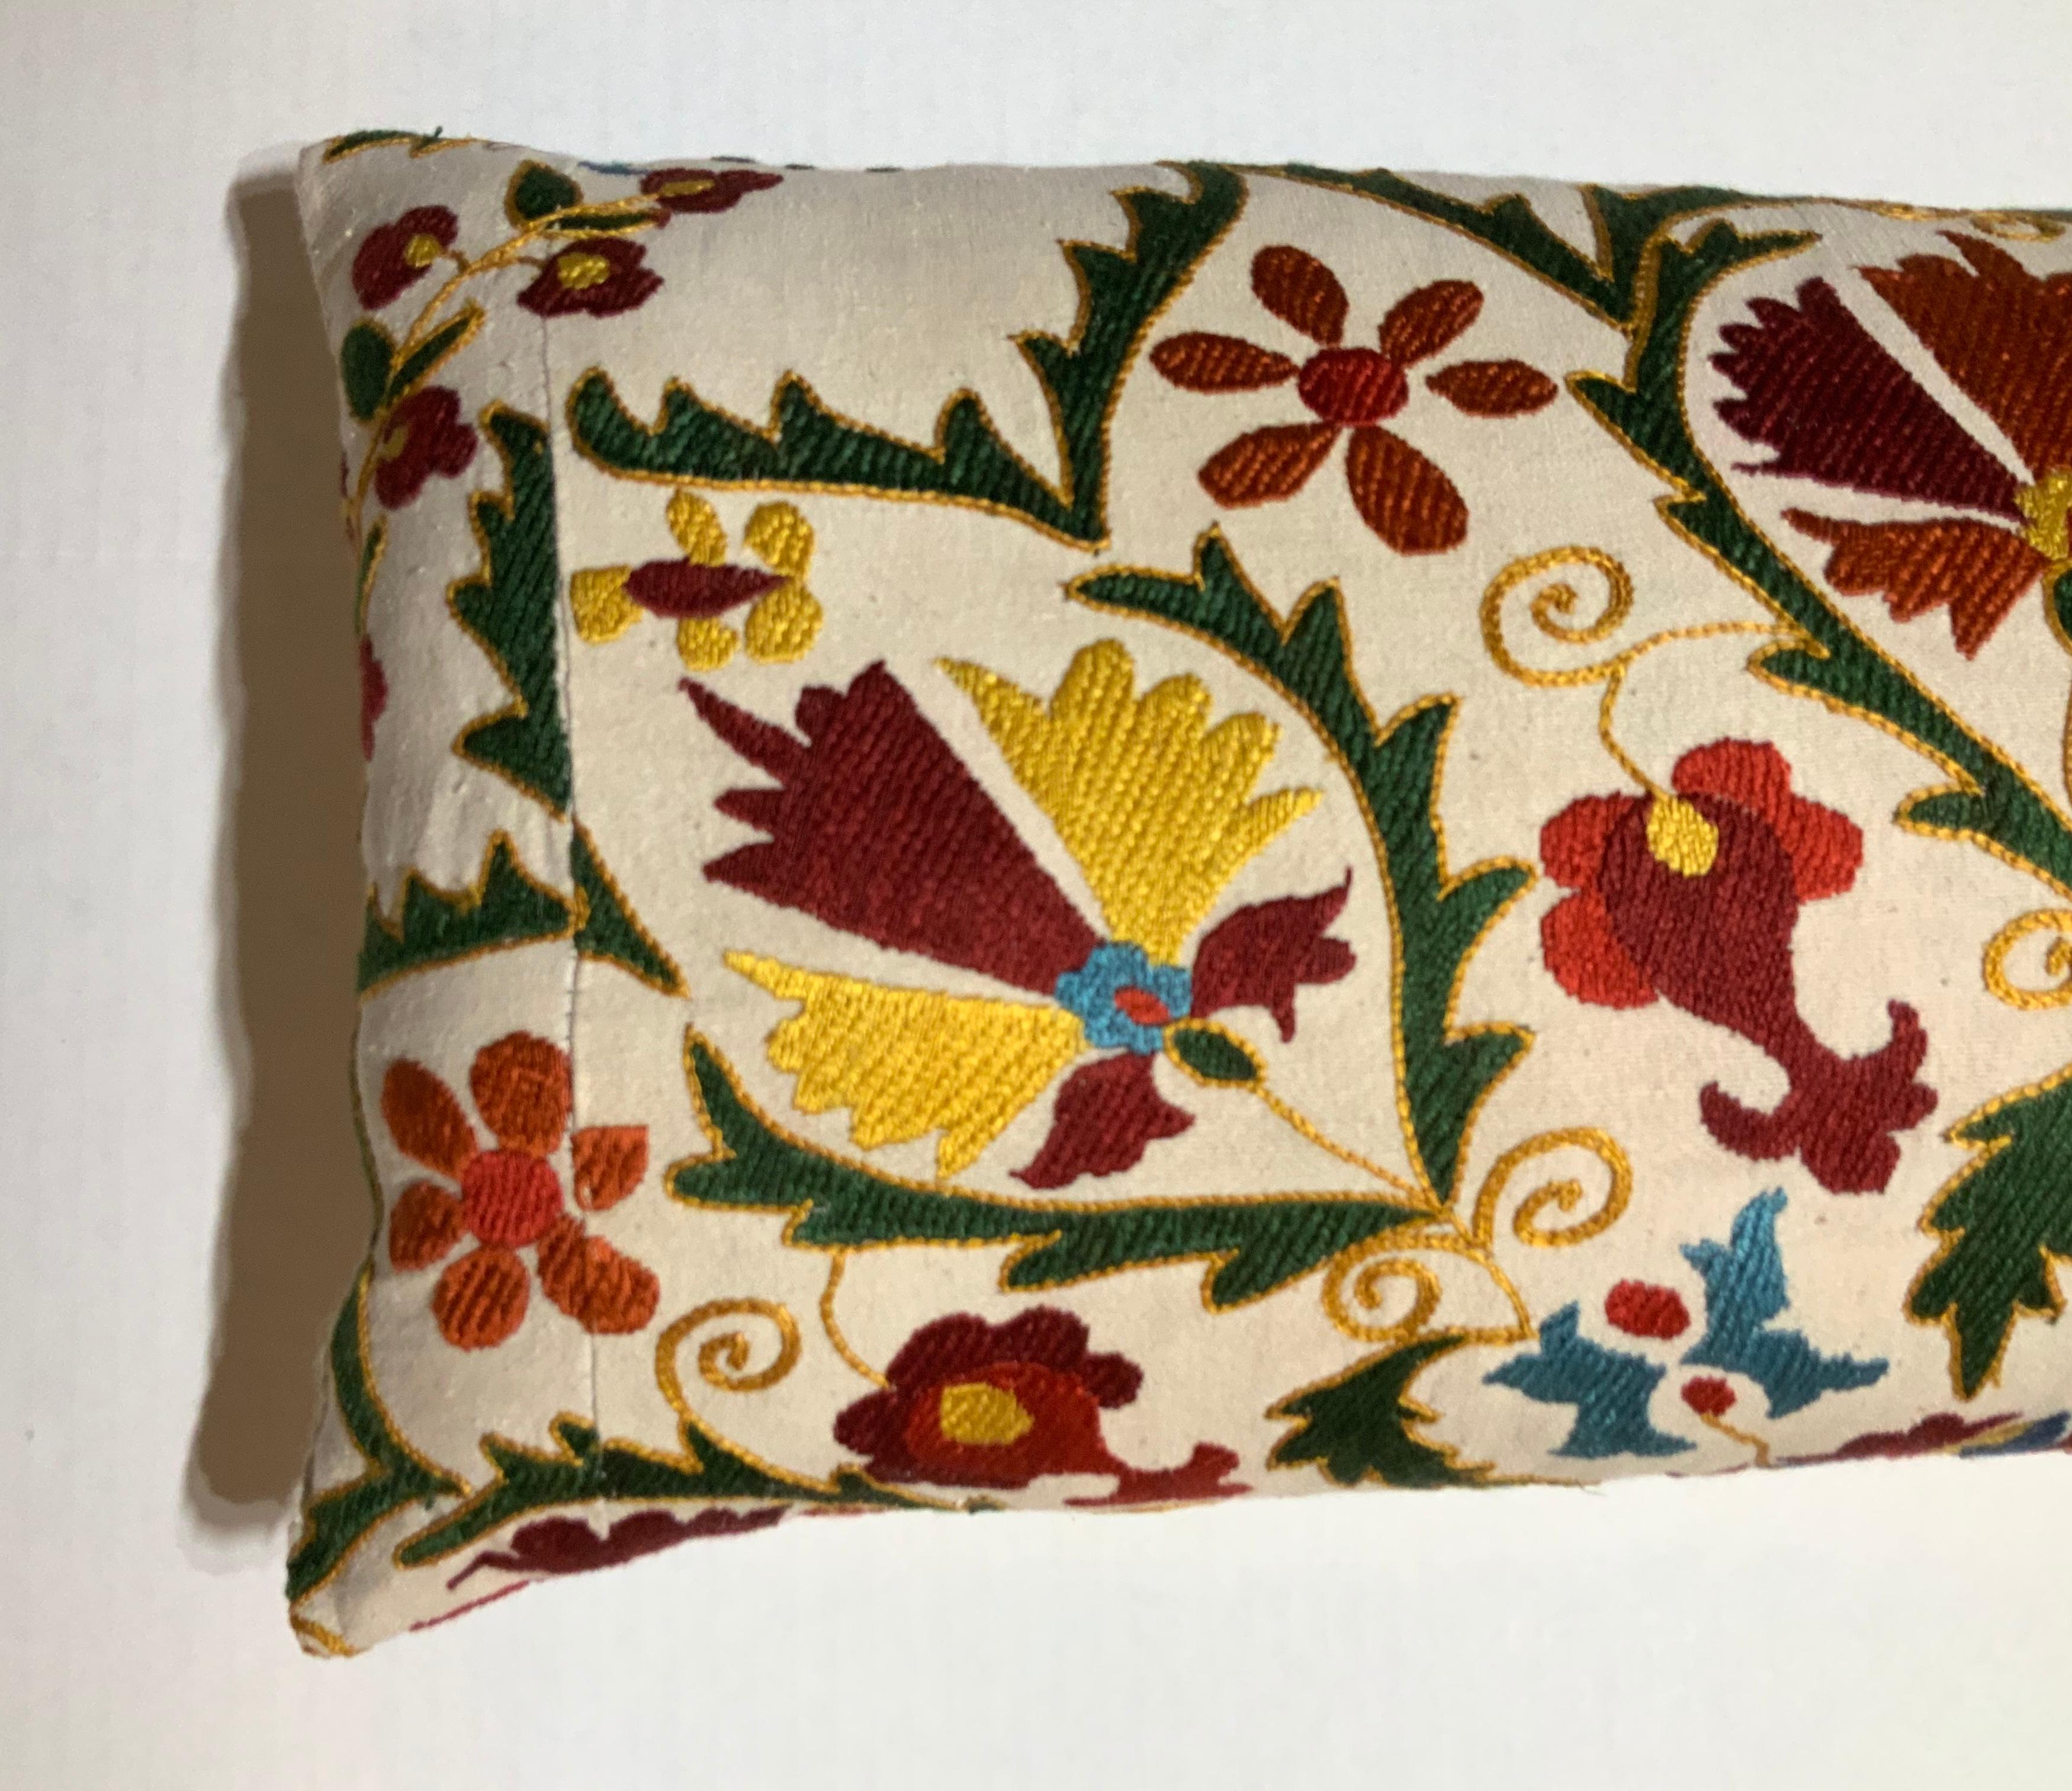 Pair of Embroidery Suzani Pillows 2